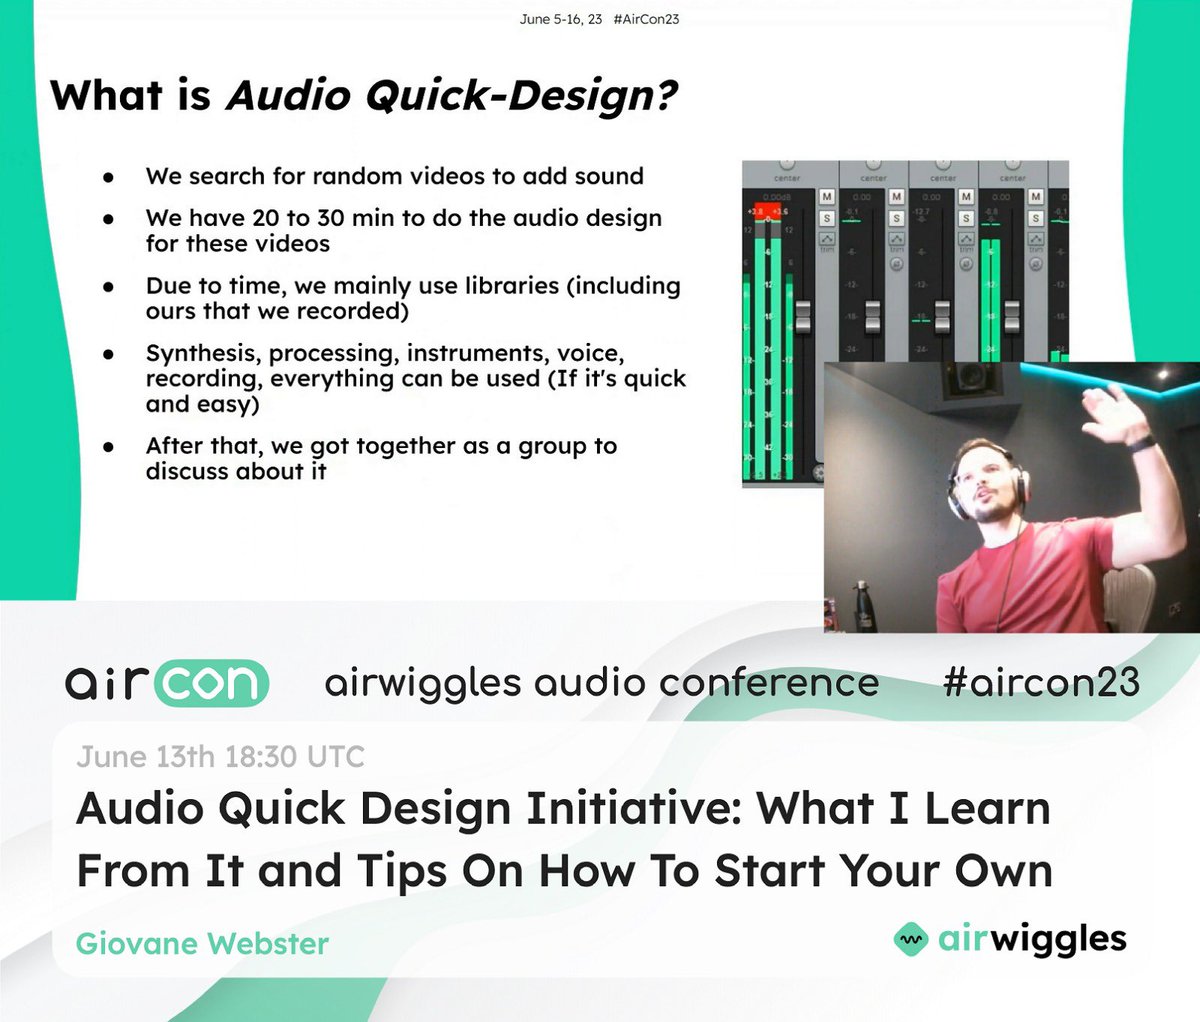 My #AirCon23 talk was recorded and is now online at the AirVault. The response was great, thanks everyone who participated! 😁
You can access directly on YouTube here - youtu.be/Z9Z4Vy7Ttds
See you at AirCon 2024! 🔈
#GameAudioTalk #AirWiggles